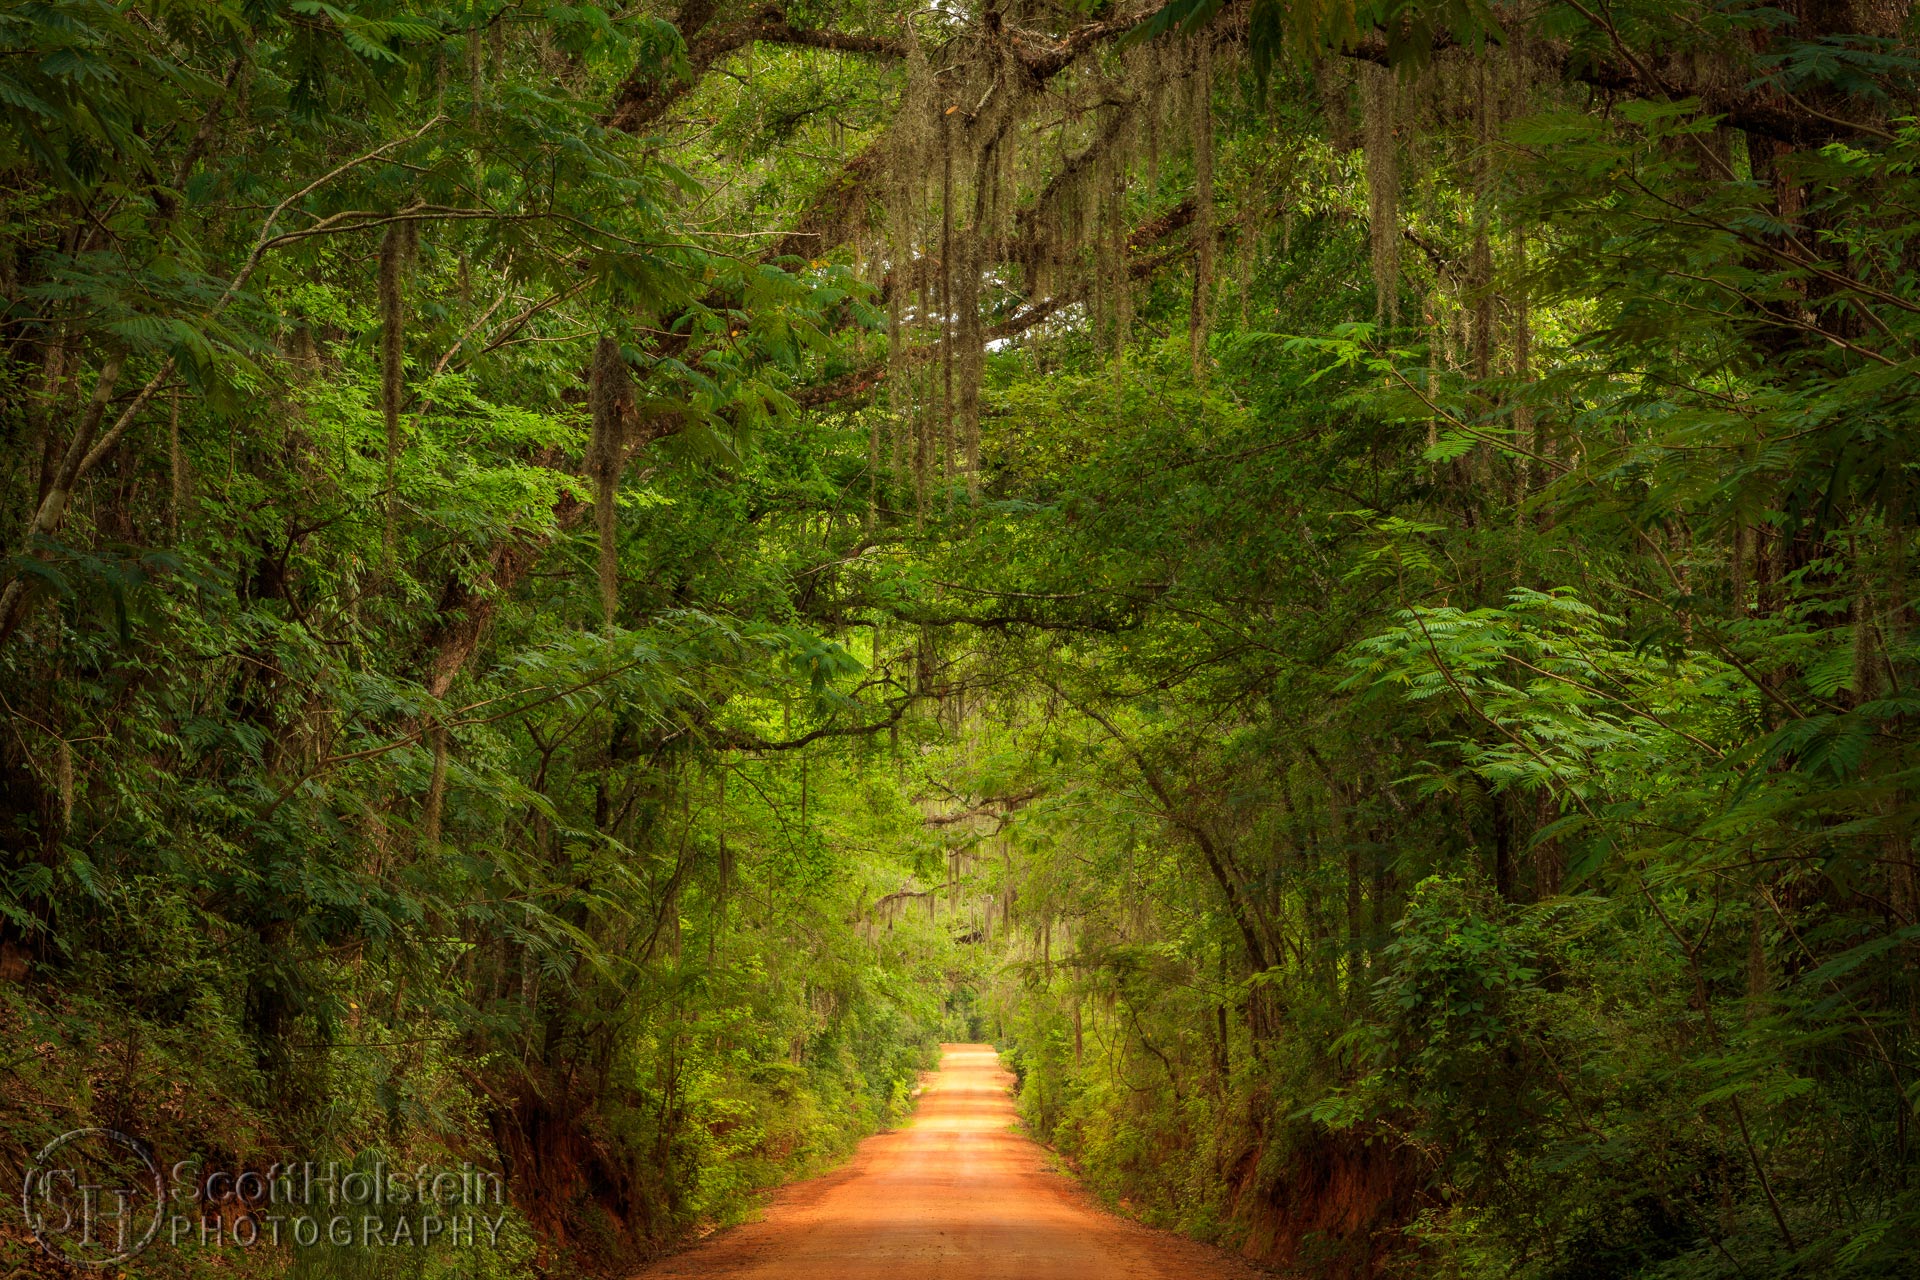 A canopied country road near Tallahassee, Old Magnolia Road stretches out beneath a canopy lush with the new greenery of late spring.